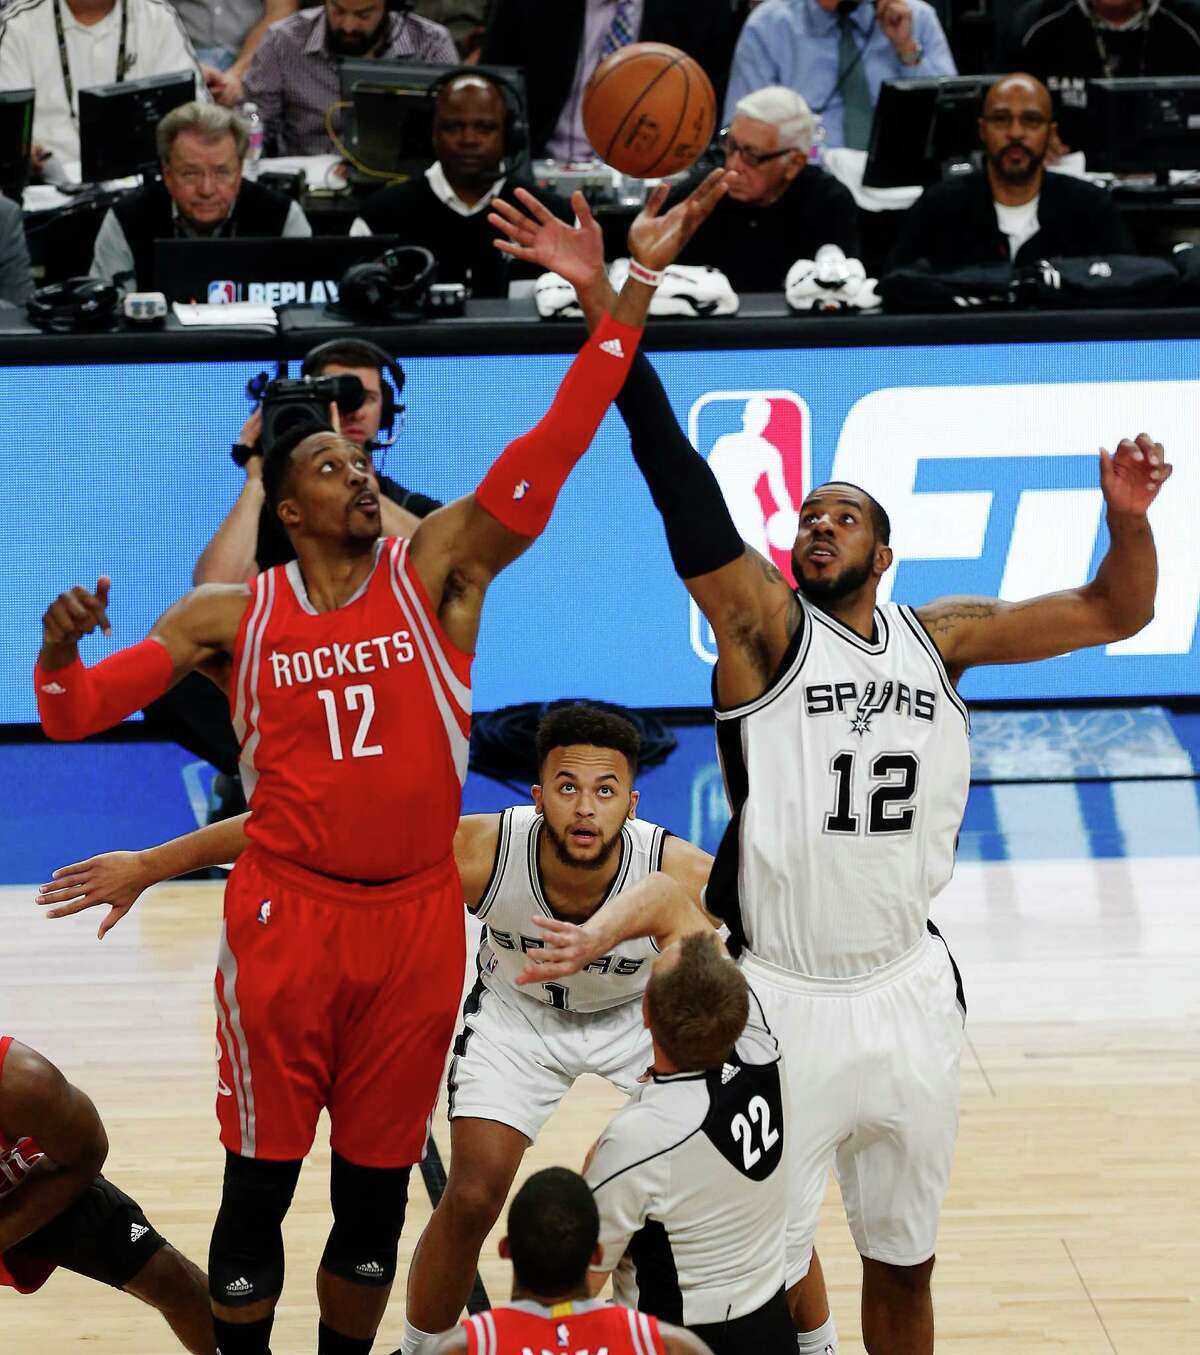 Spurs' LaMarcus Aldridge (12) and Houston Rocket's Dwight Howard (12) compete for the tipoff at the AT&T Center on Wednesday, Jan. 27, 2016. (Kin Man Hui/San Antonio Express-News)